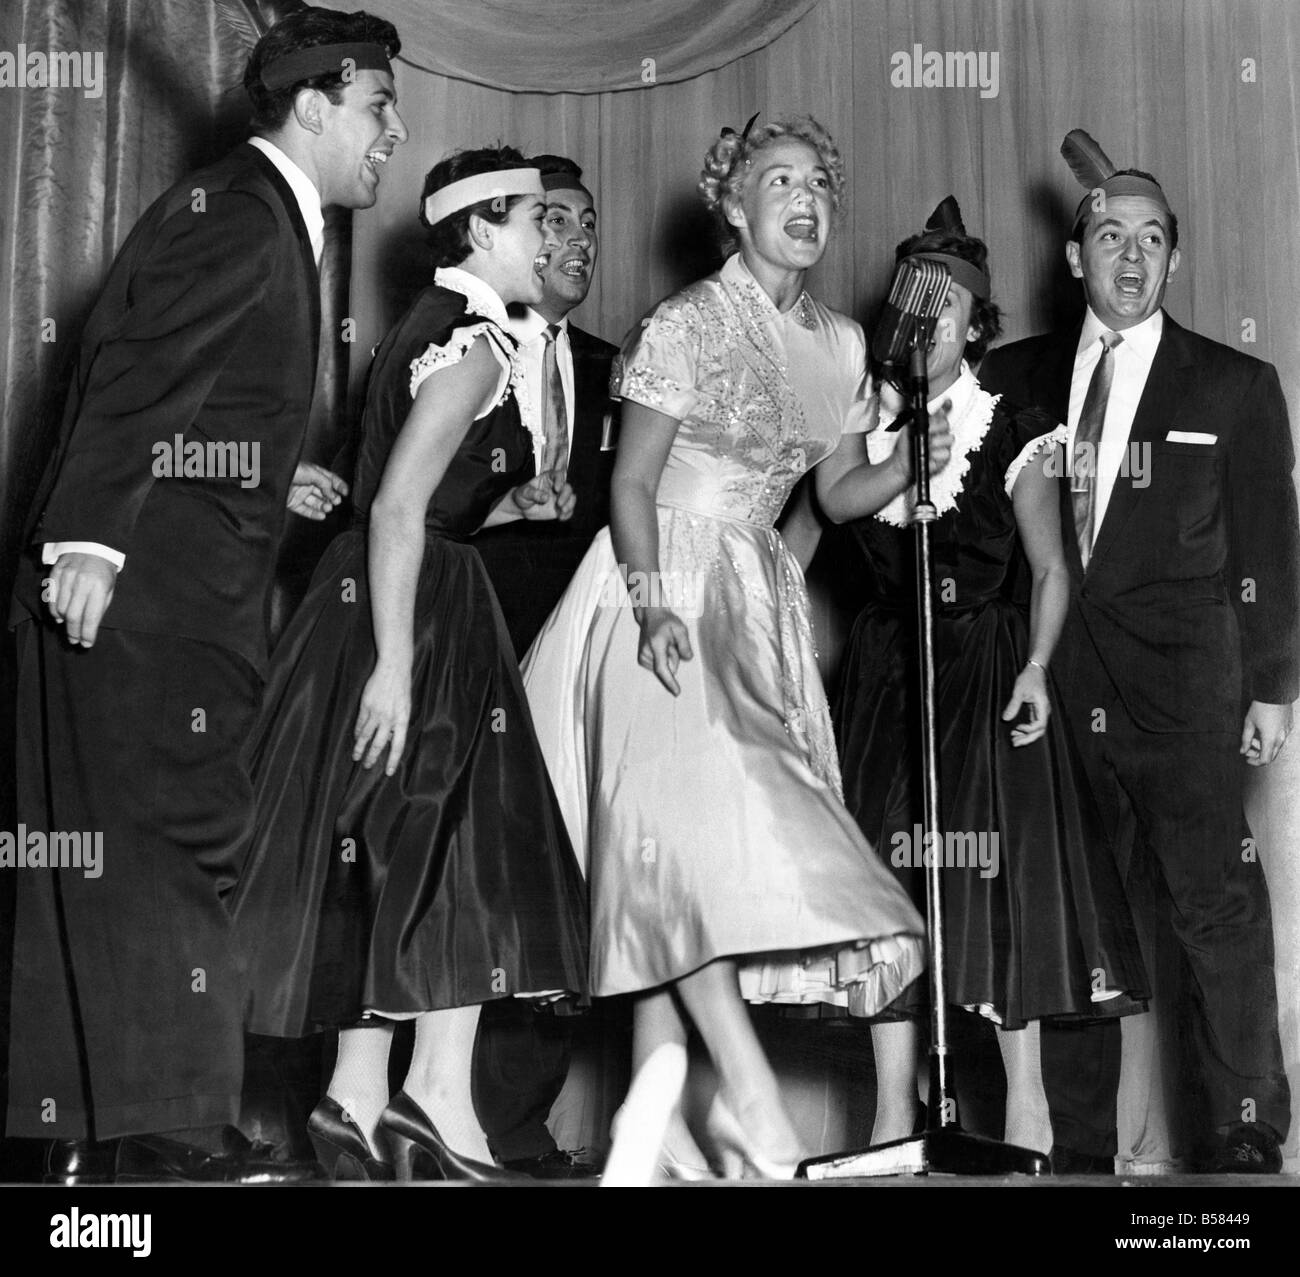 Betty Hutton at Palladium. Betty Hutton who appears at the Palladium tomorrow had a dress rehearsal. Betty Hutton with the Skylarks singing one of her numbers in the show. Earing a yellow full skirted dress. September 1952 P005293 Stock Photo